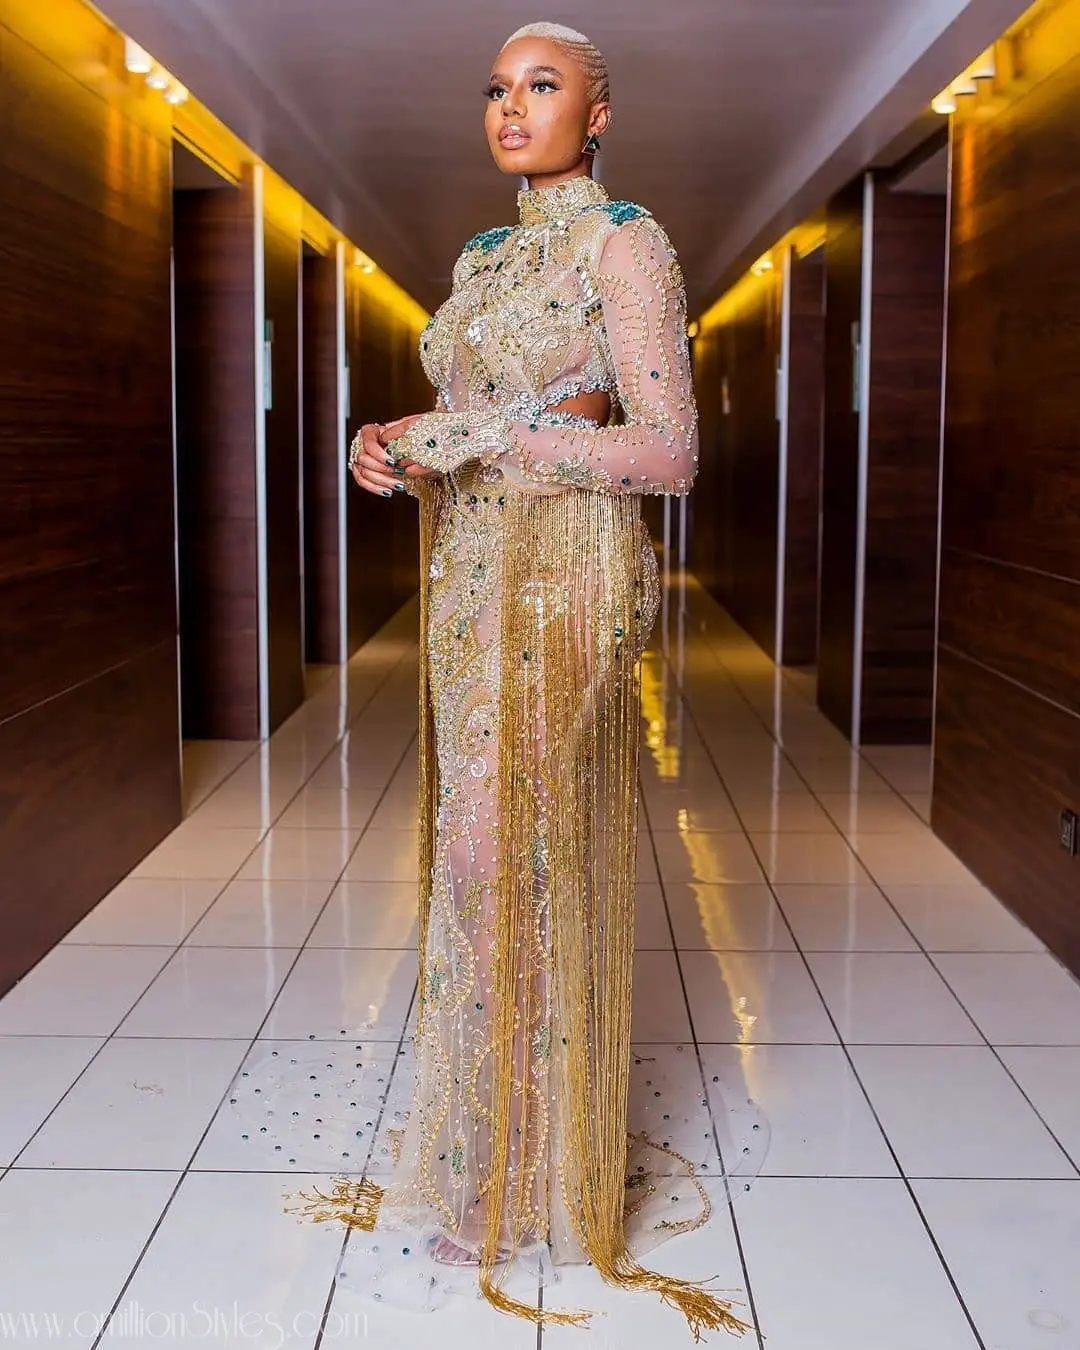 Stunning Women's Outfits From The 2020 AMVCA